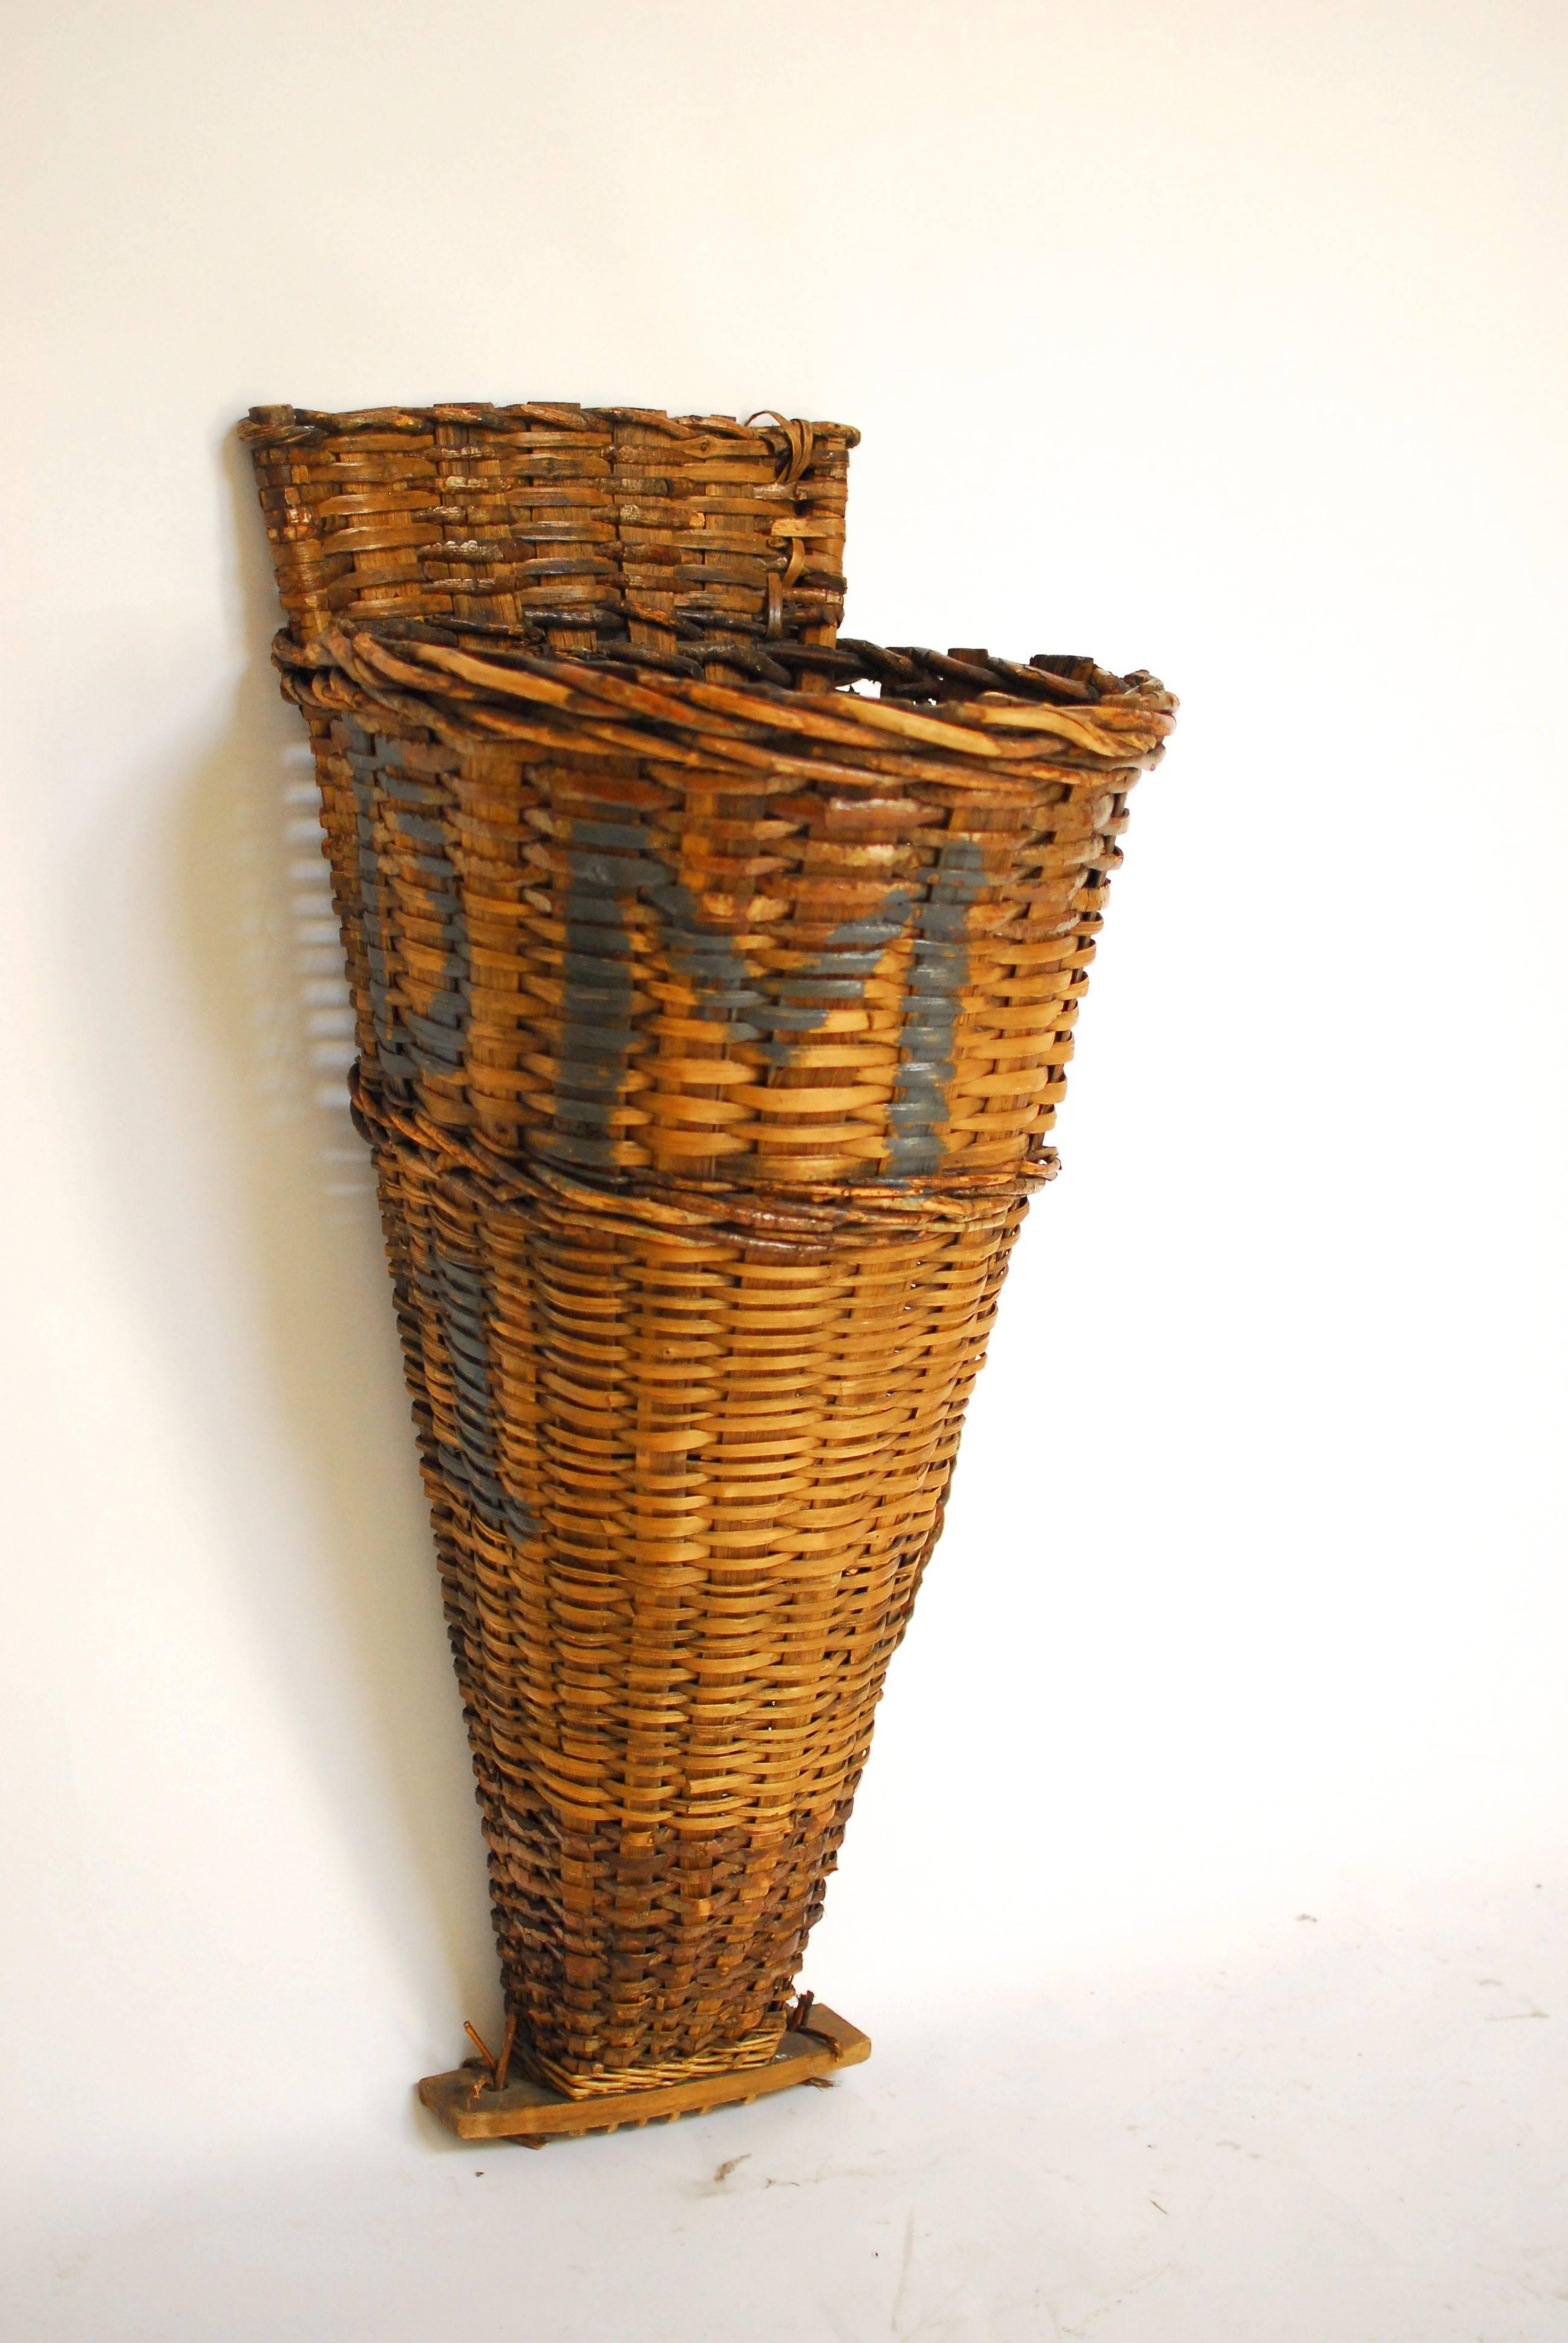 A tall, French harvest basket hotte made of woven willow and oak from the Champagne region of Burgundy, France. Beautifully woven with painted winery initials. The finish is warm and rich. Sits on a wooden base.
   